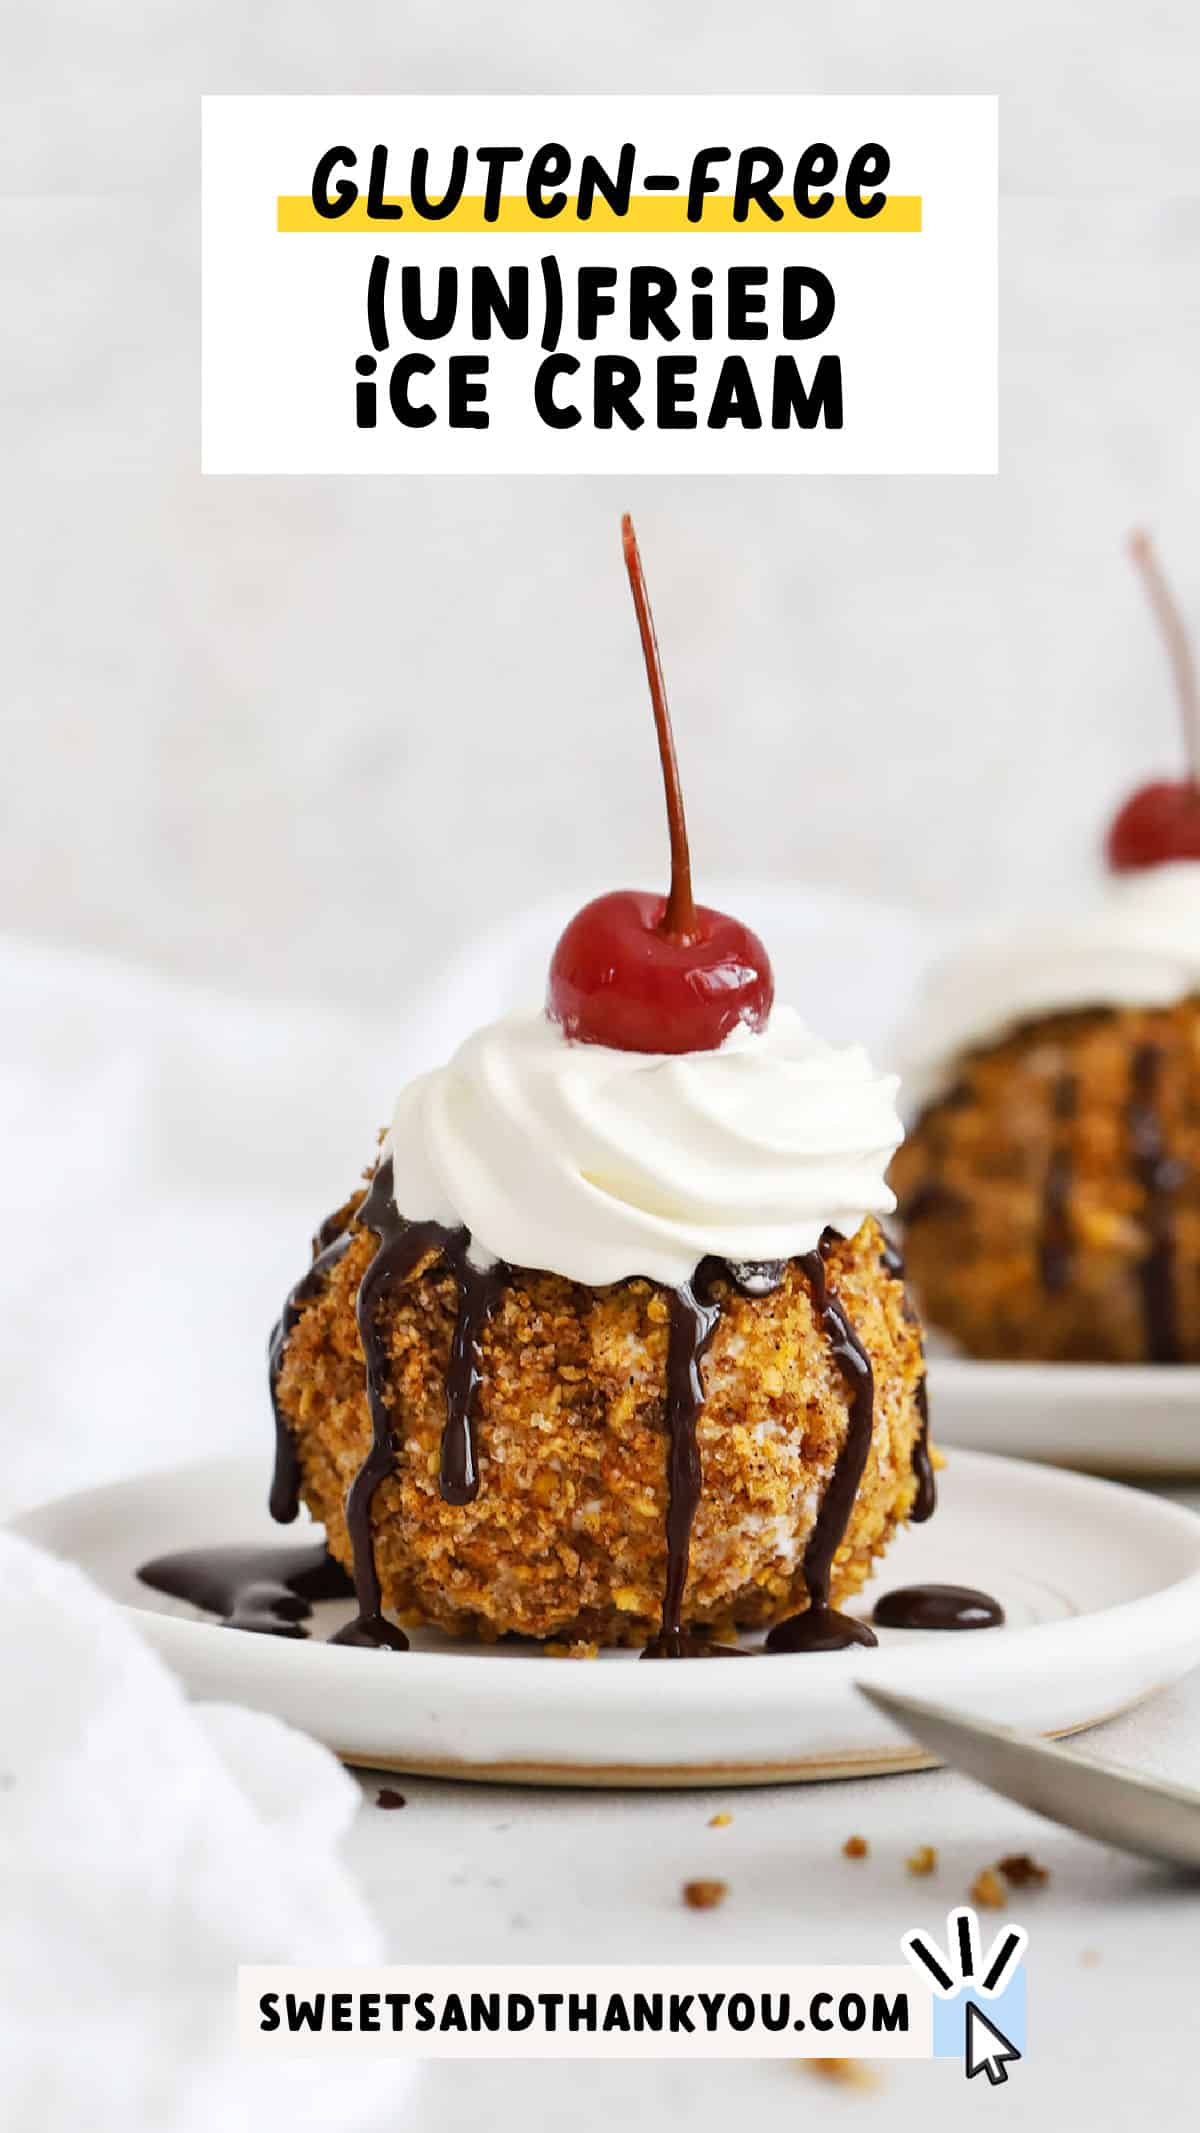 Our (un-fried) gluten-free fried ice cream recipe is the perfect ice cream dessert to cool off with--no frying required! You'll love the cinnamon-y crunch of the coating with the creamy ice cream! Try this as a Tex-Mex dessert to finish a taco night or serve it up as a fun summer dessert to cool off with. This easy no-bake dessert is simple to make and even more fun to eat! Get the recipe and our favorite toppings at sweetsandthankyou.com